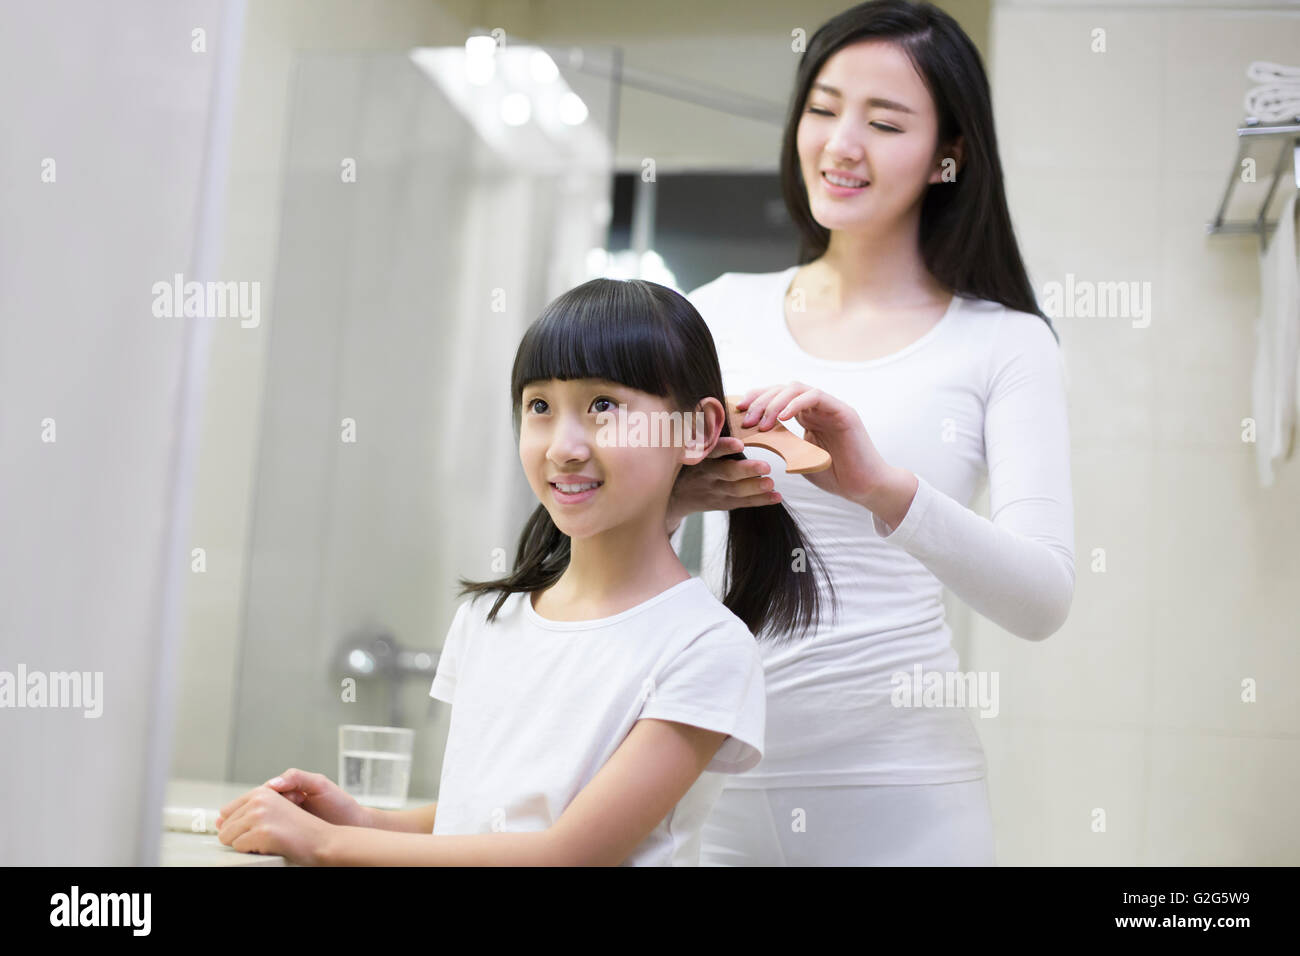 Young mother combing daughter's hair Stock Photo